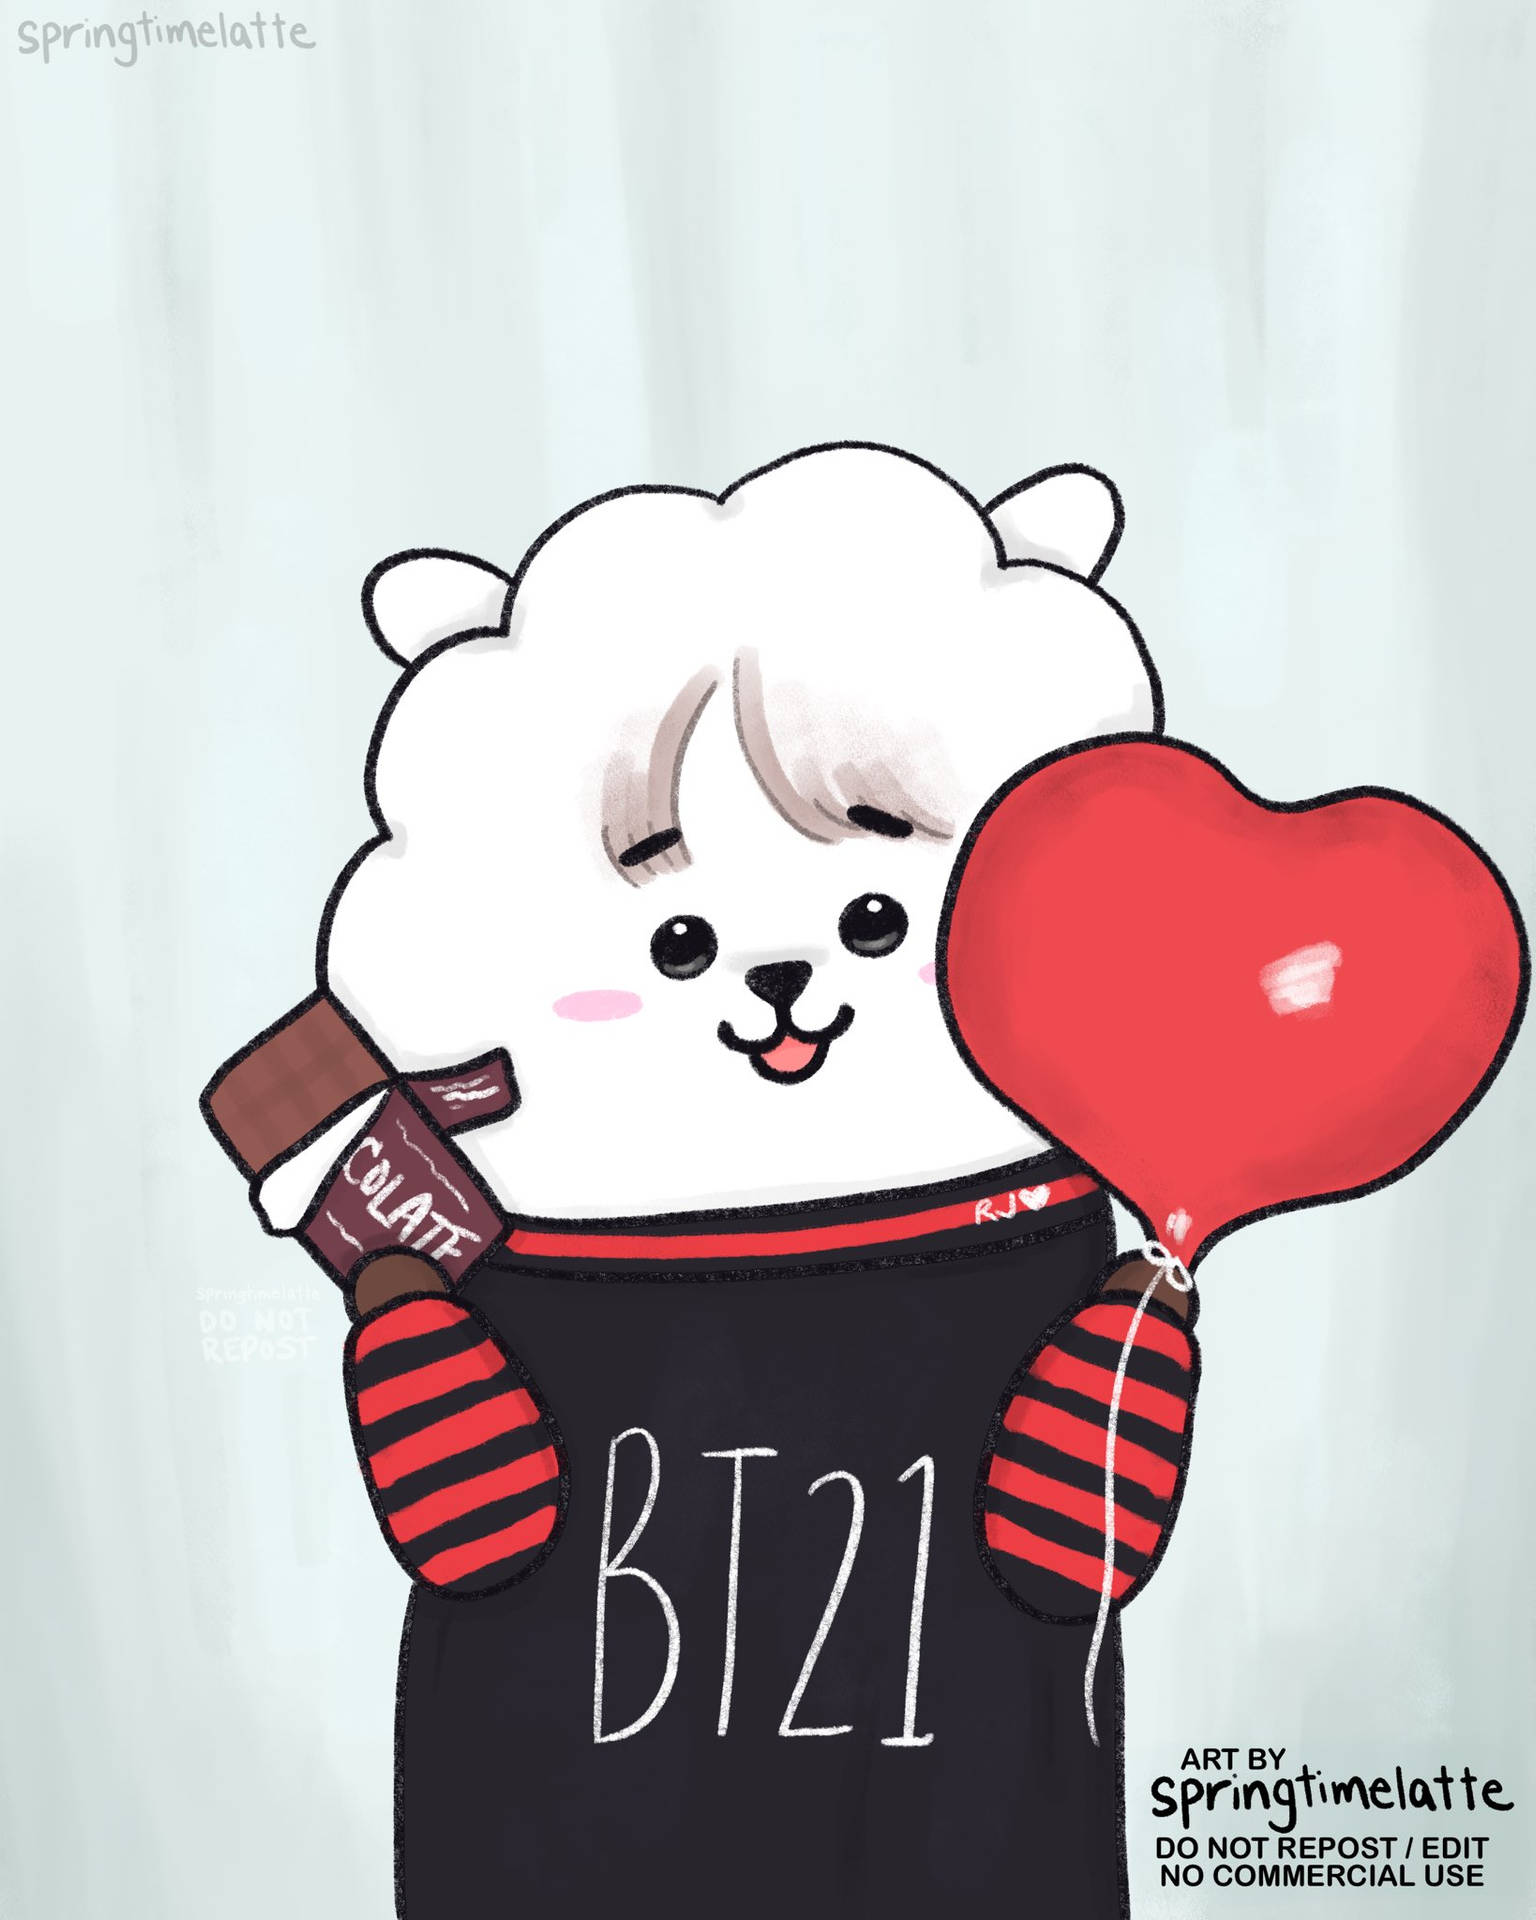 Caption: Cheerful Rj Bt21 Showing Off Its Charming Smile